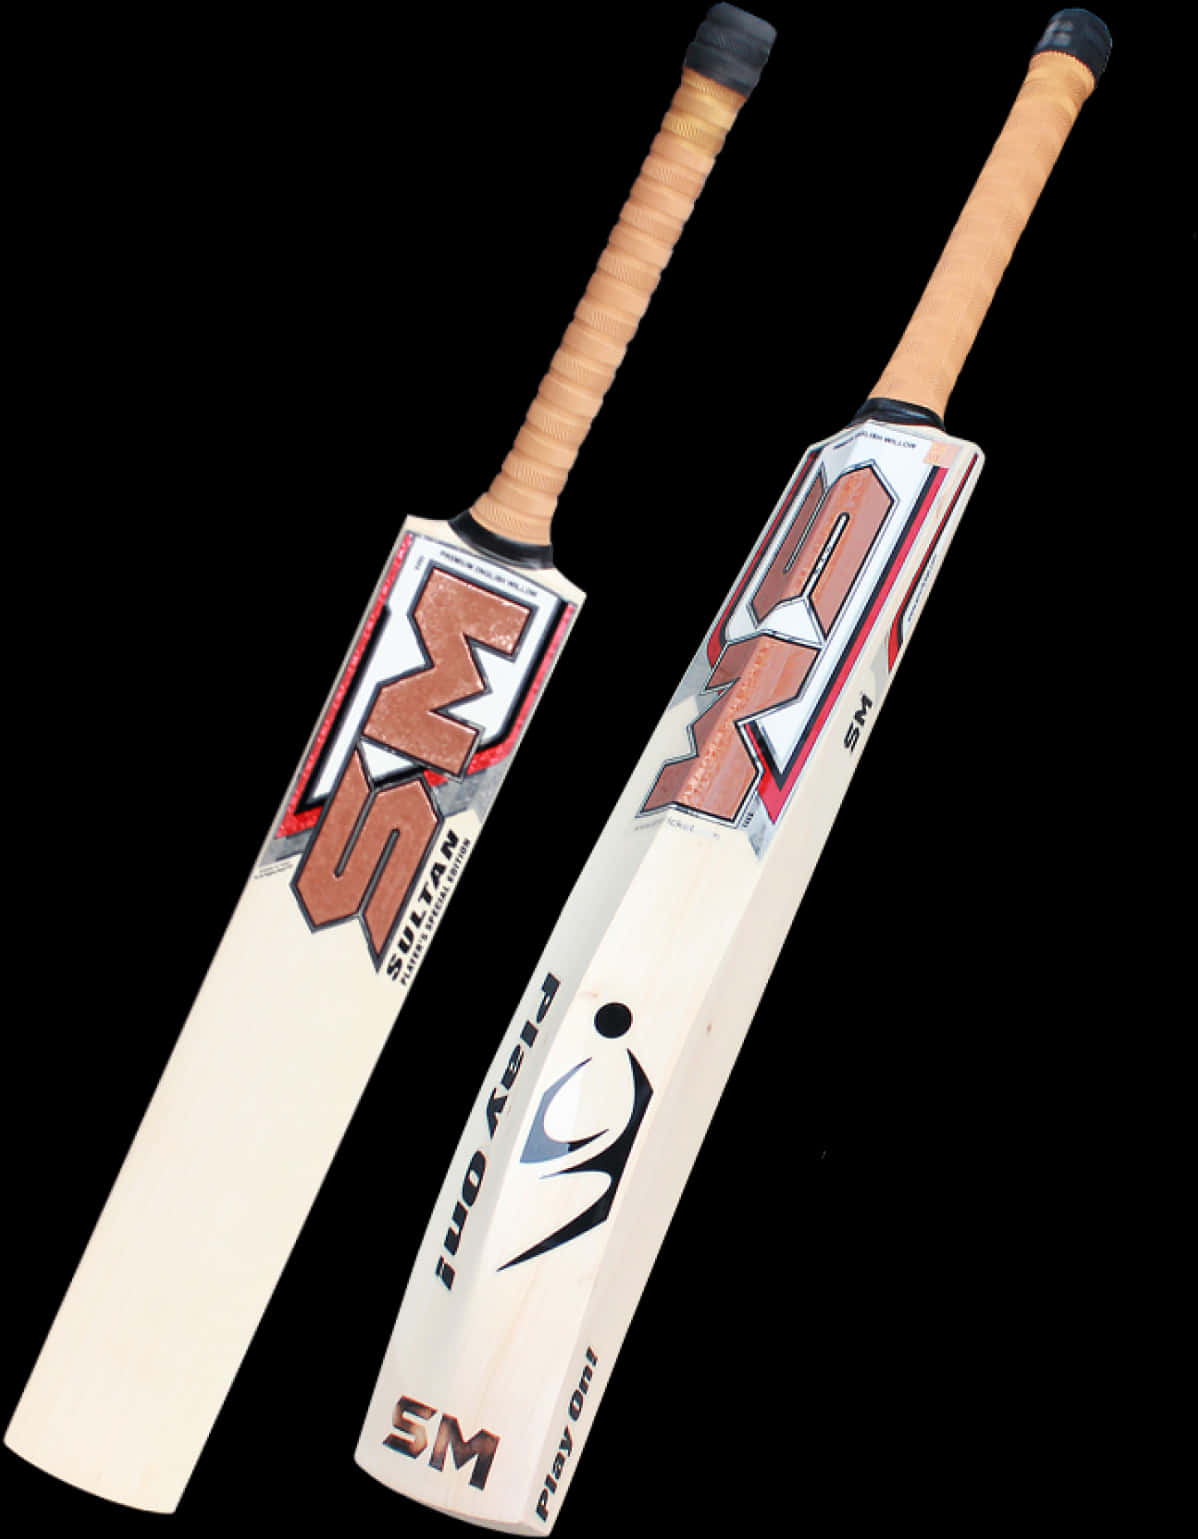 Cricket Images Png